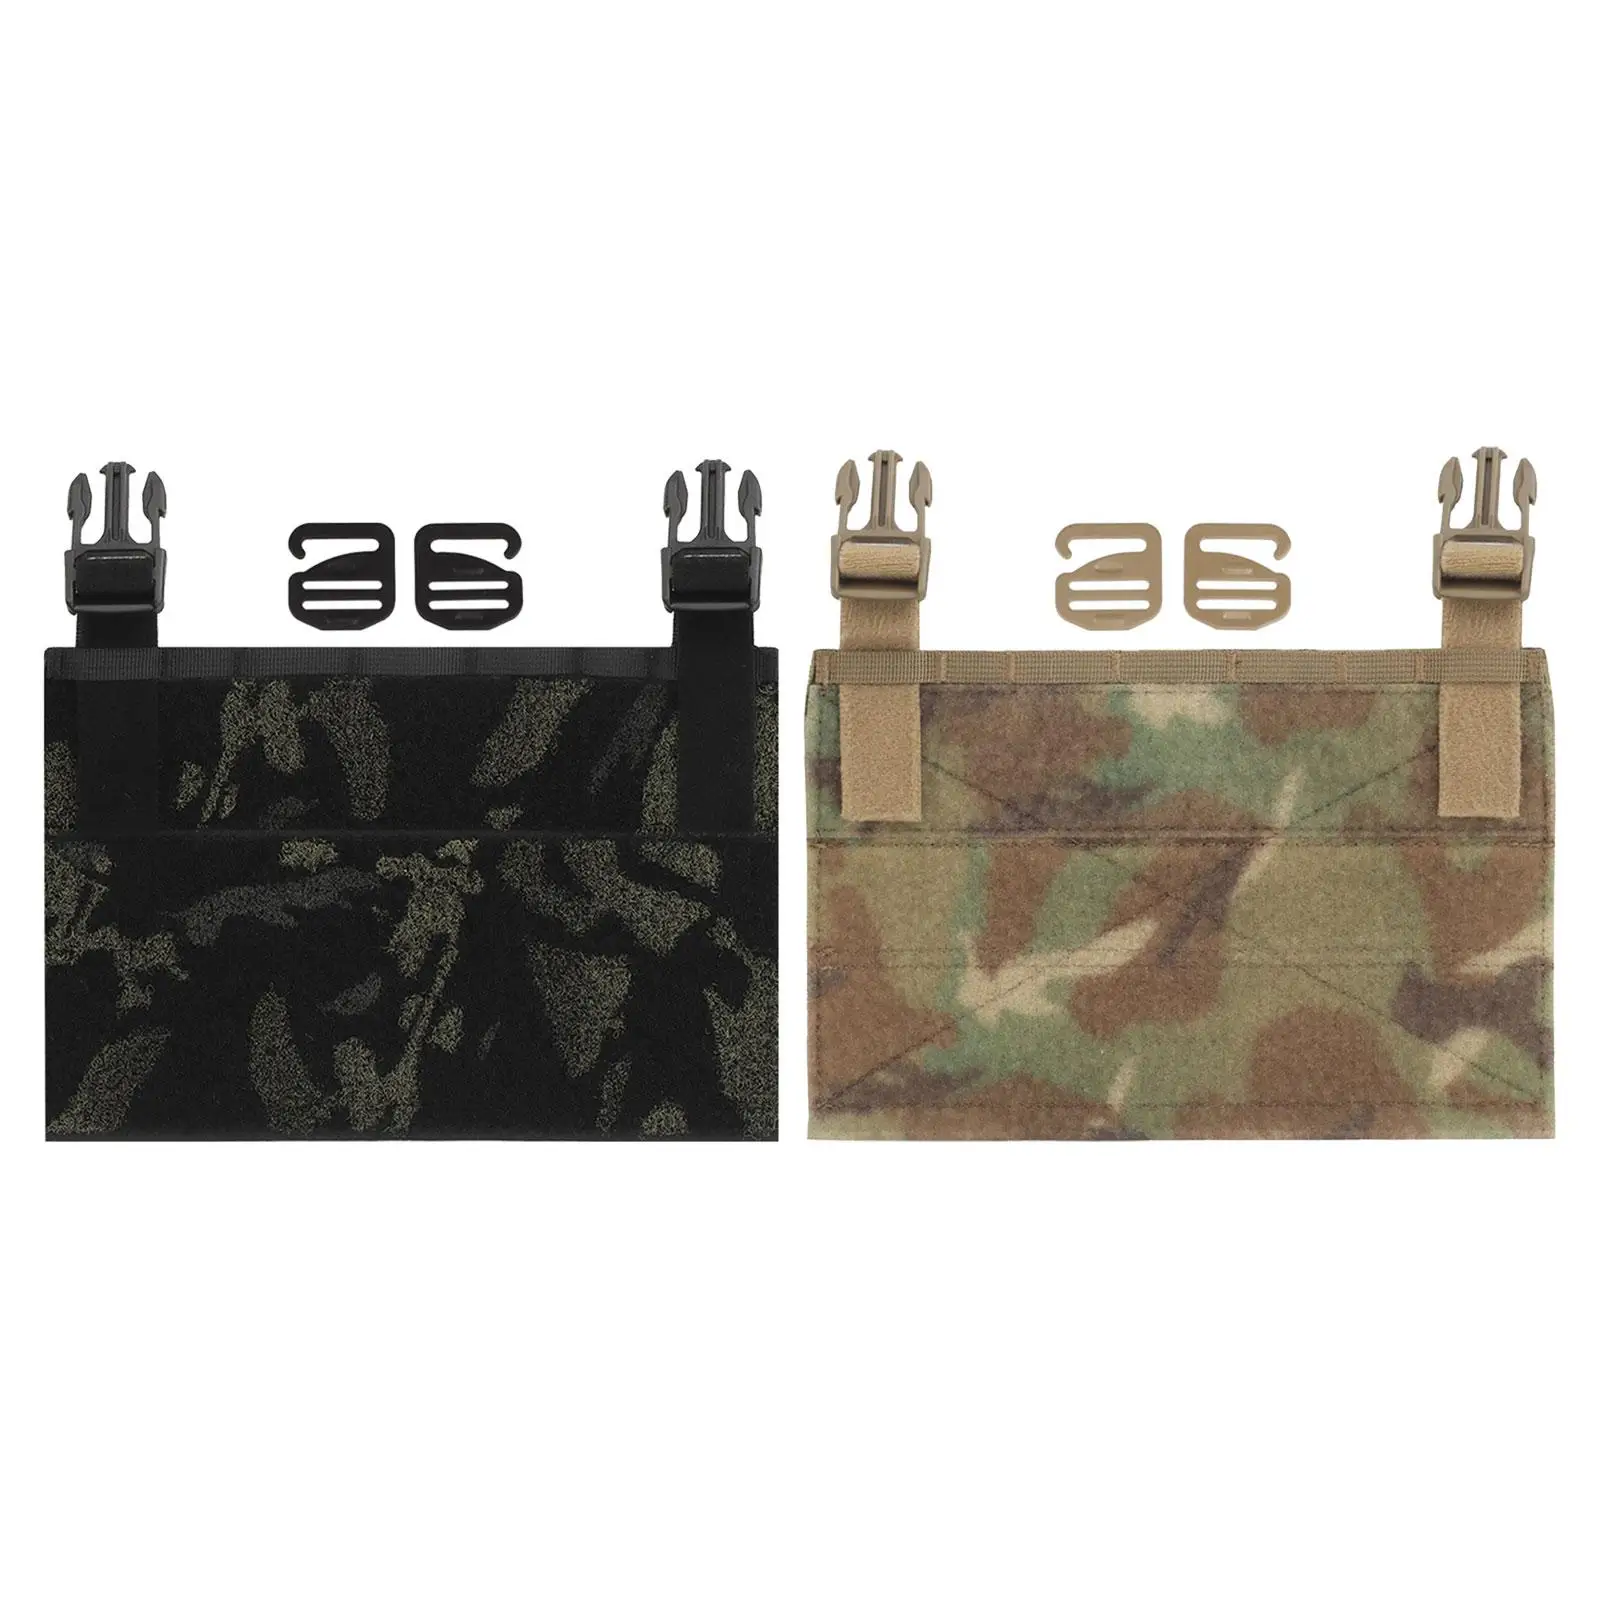 Gaming Vest Front Panel Adapter Accessory Quick Release Training Vest Parts for Outdoor Game Travel Practice Camping